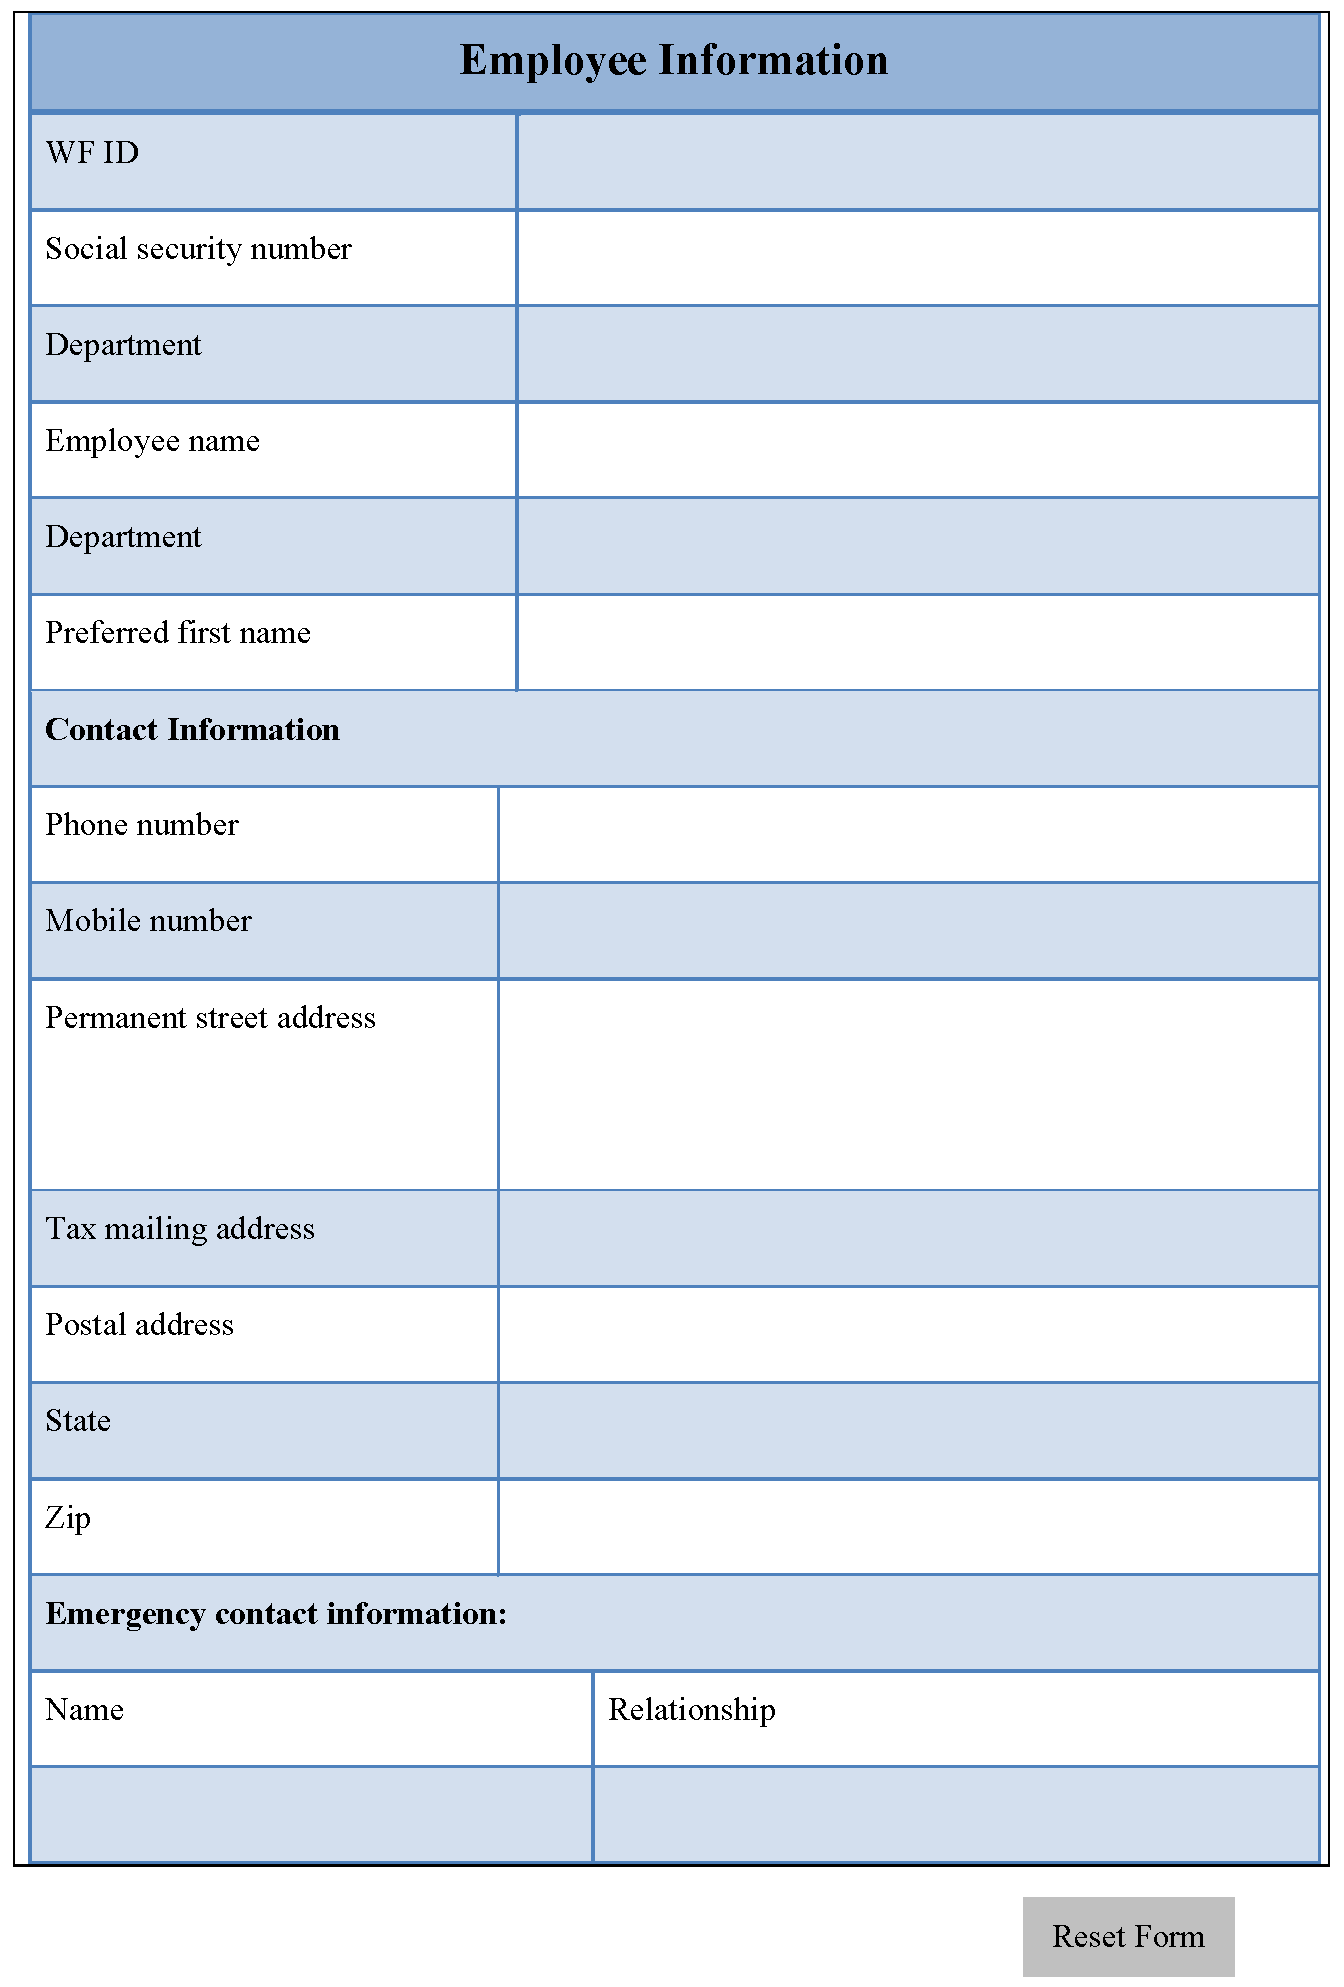 employee-information-form-editable-pdf-forms